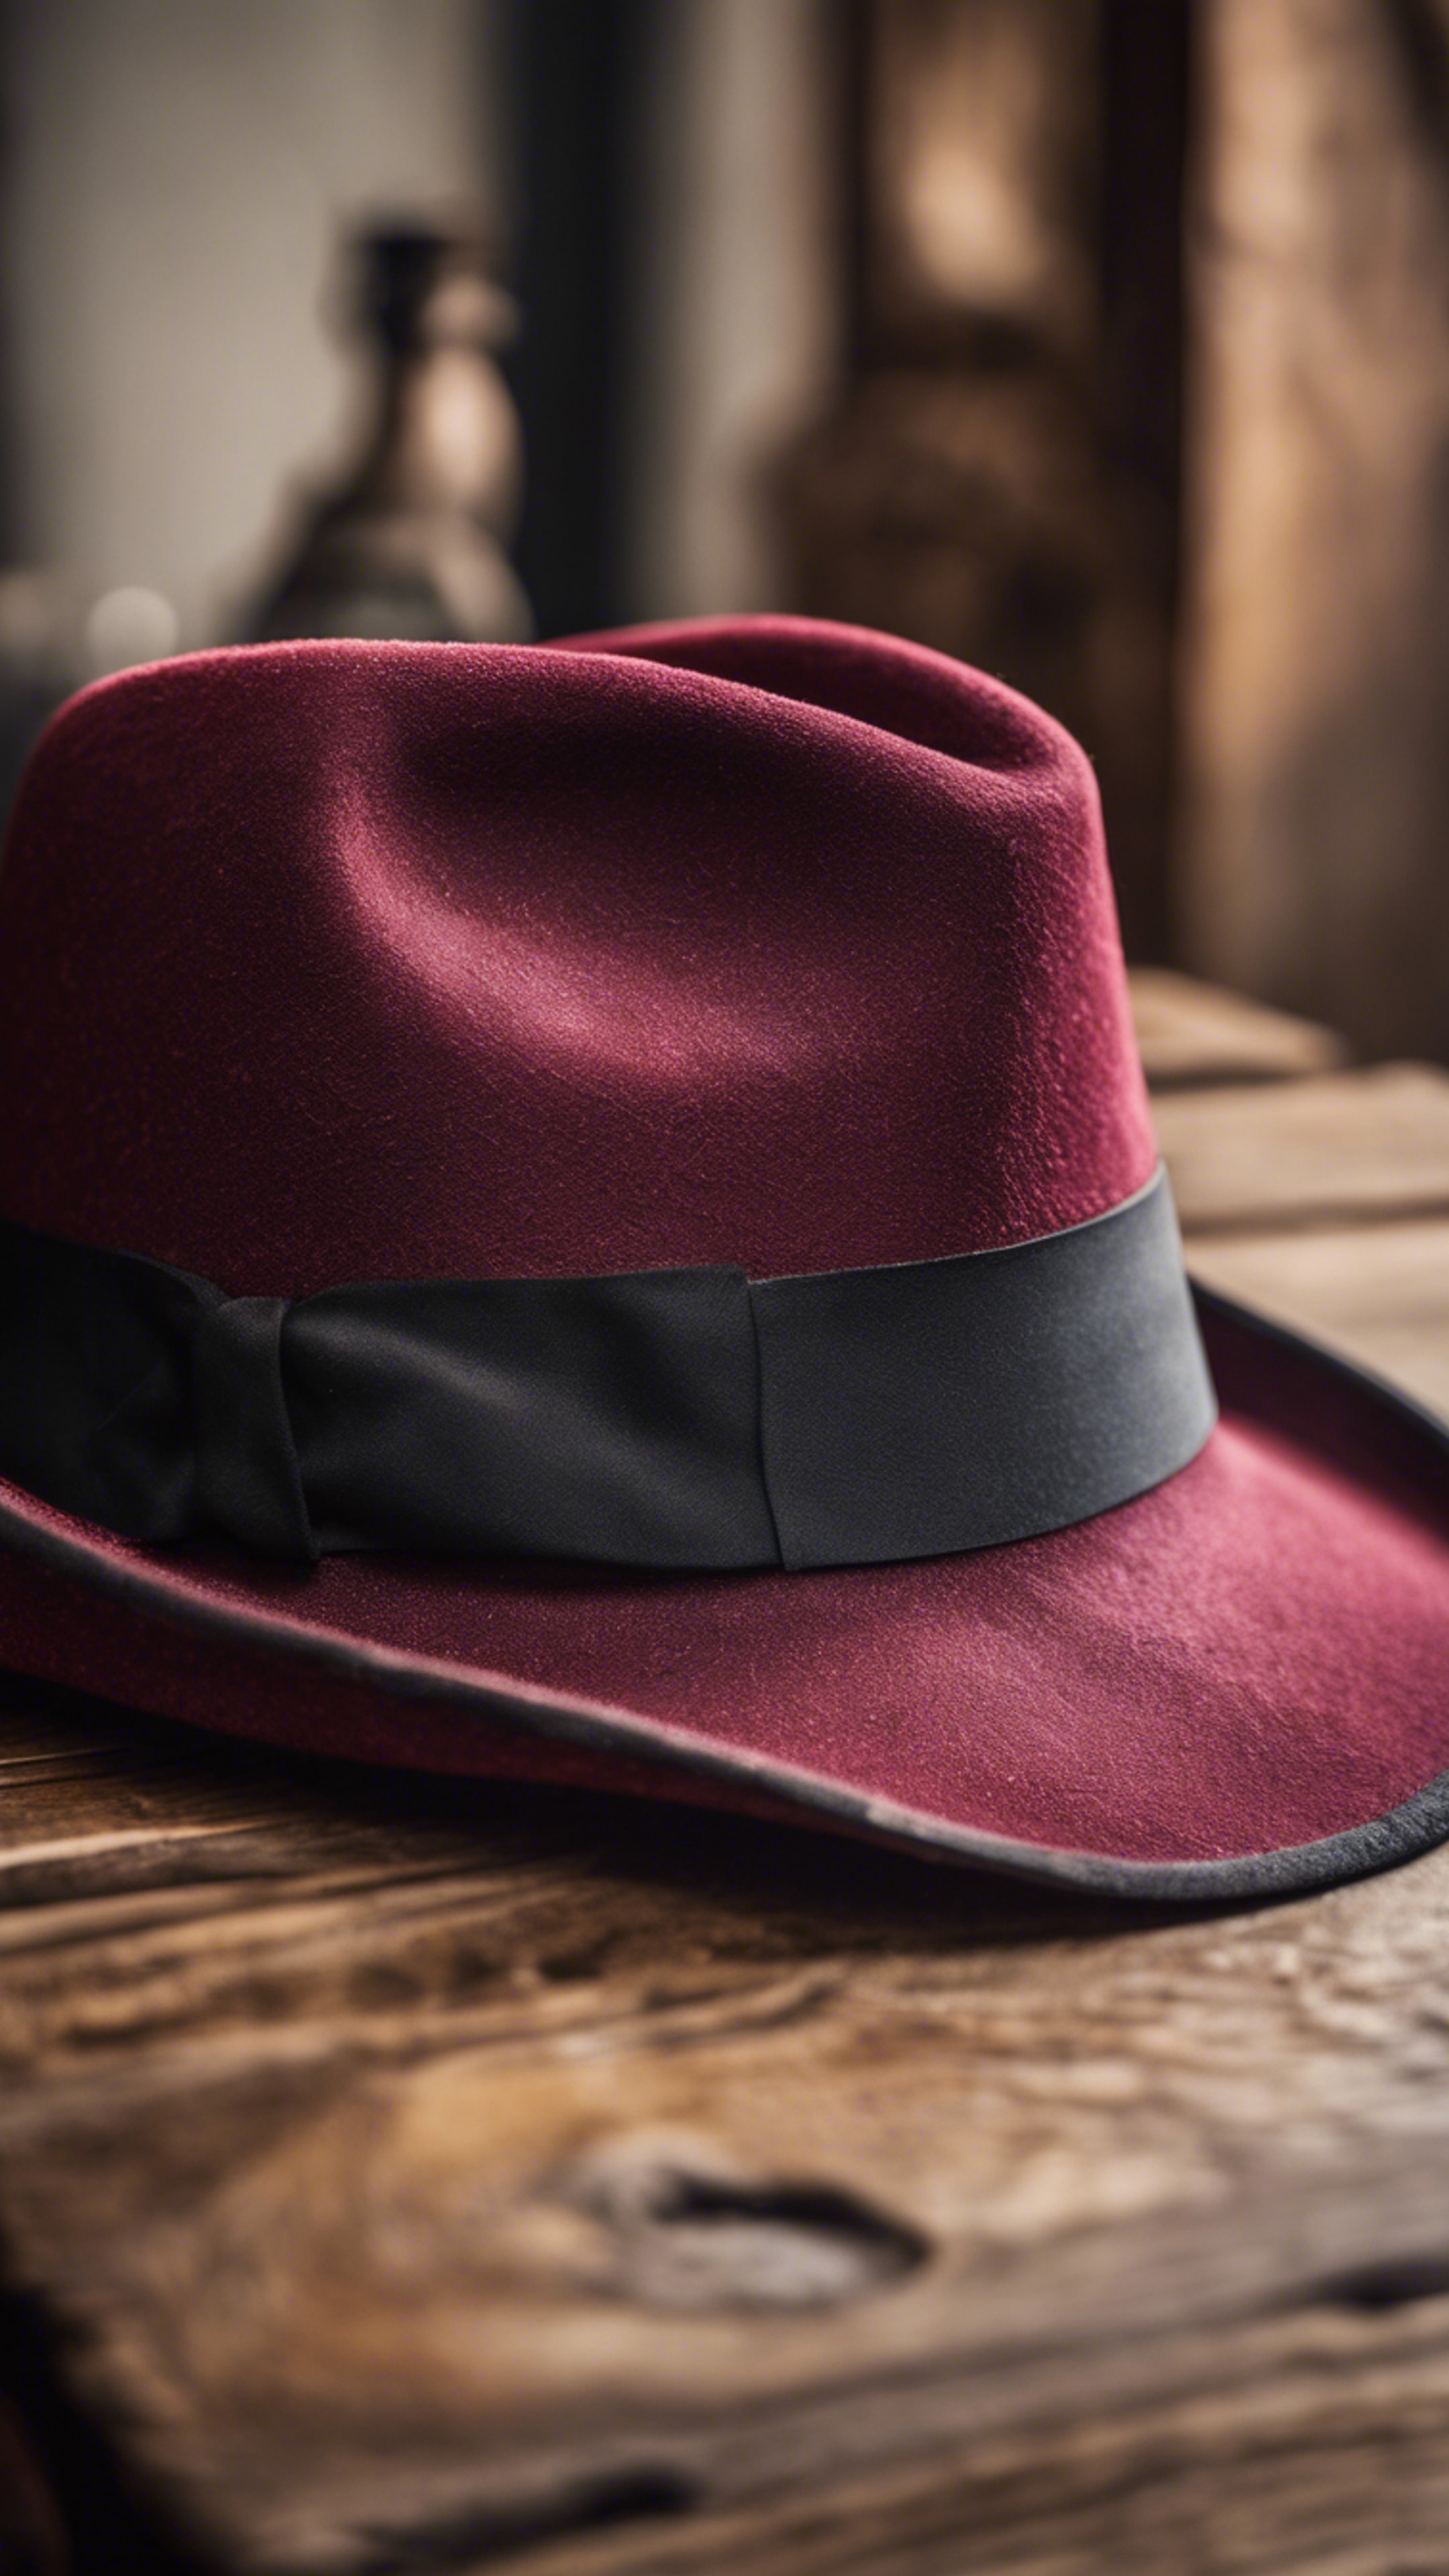 A cool maroon fedora hat positioned on an antique wooden table. Wallpaper[05b3f475f93c4ade83cc]